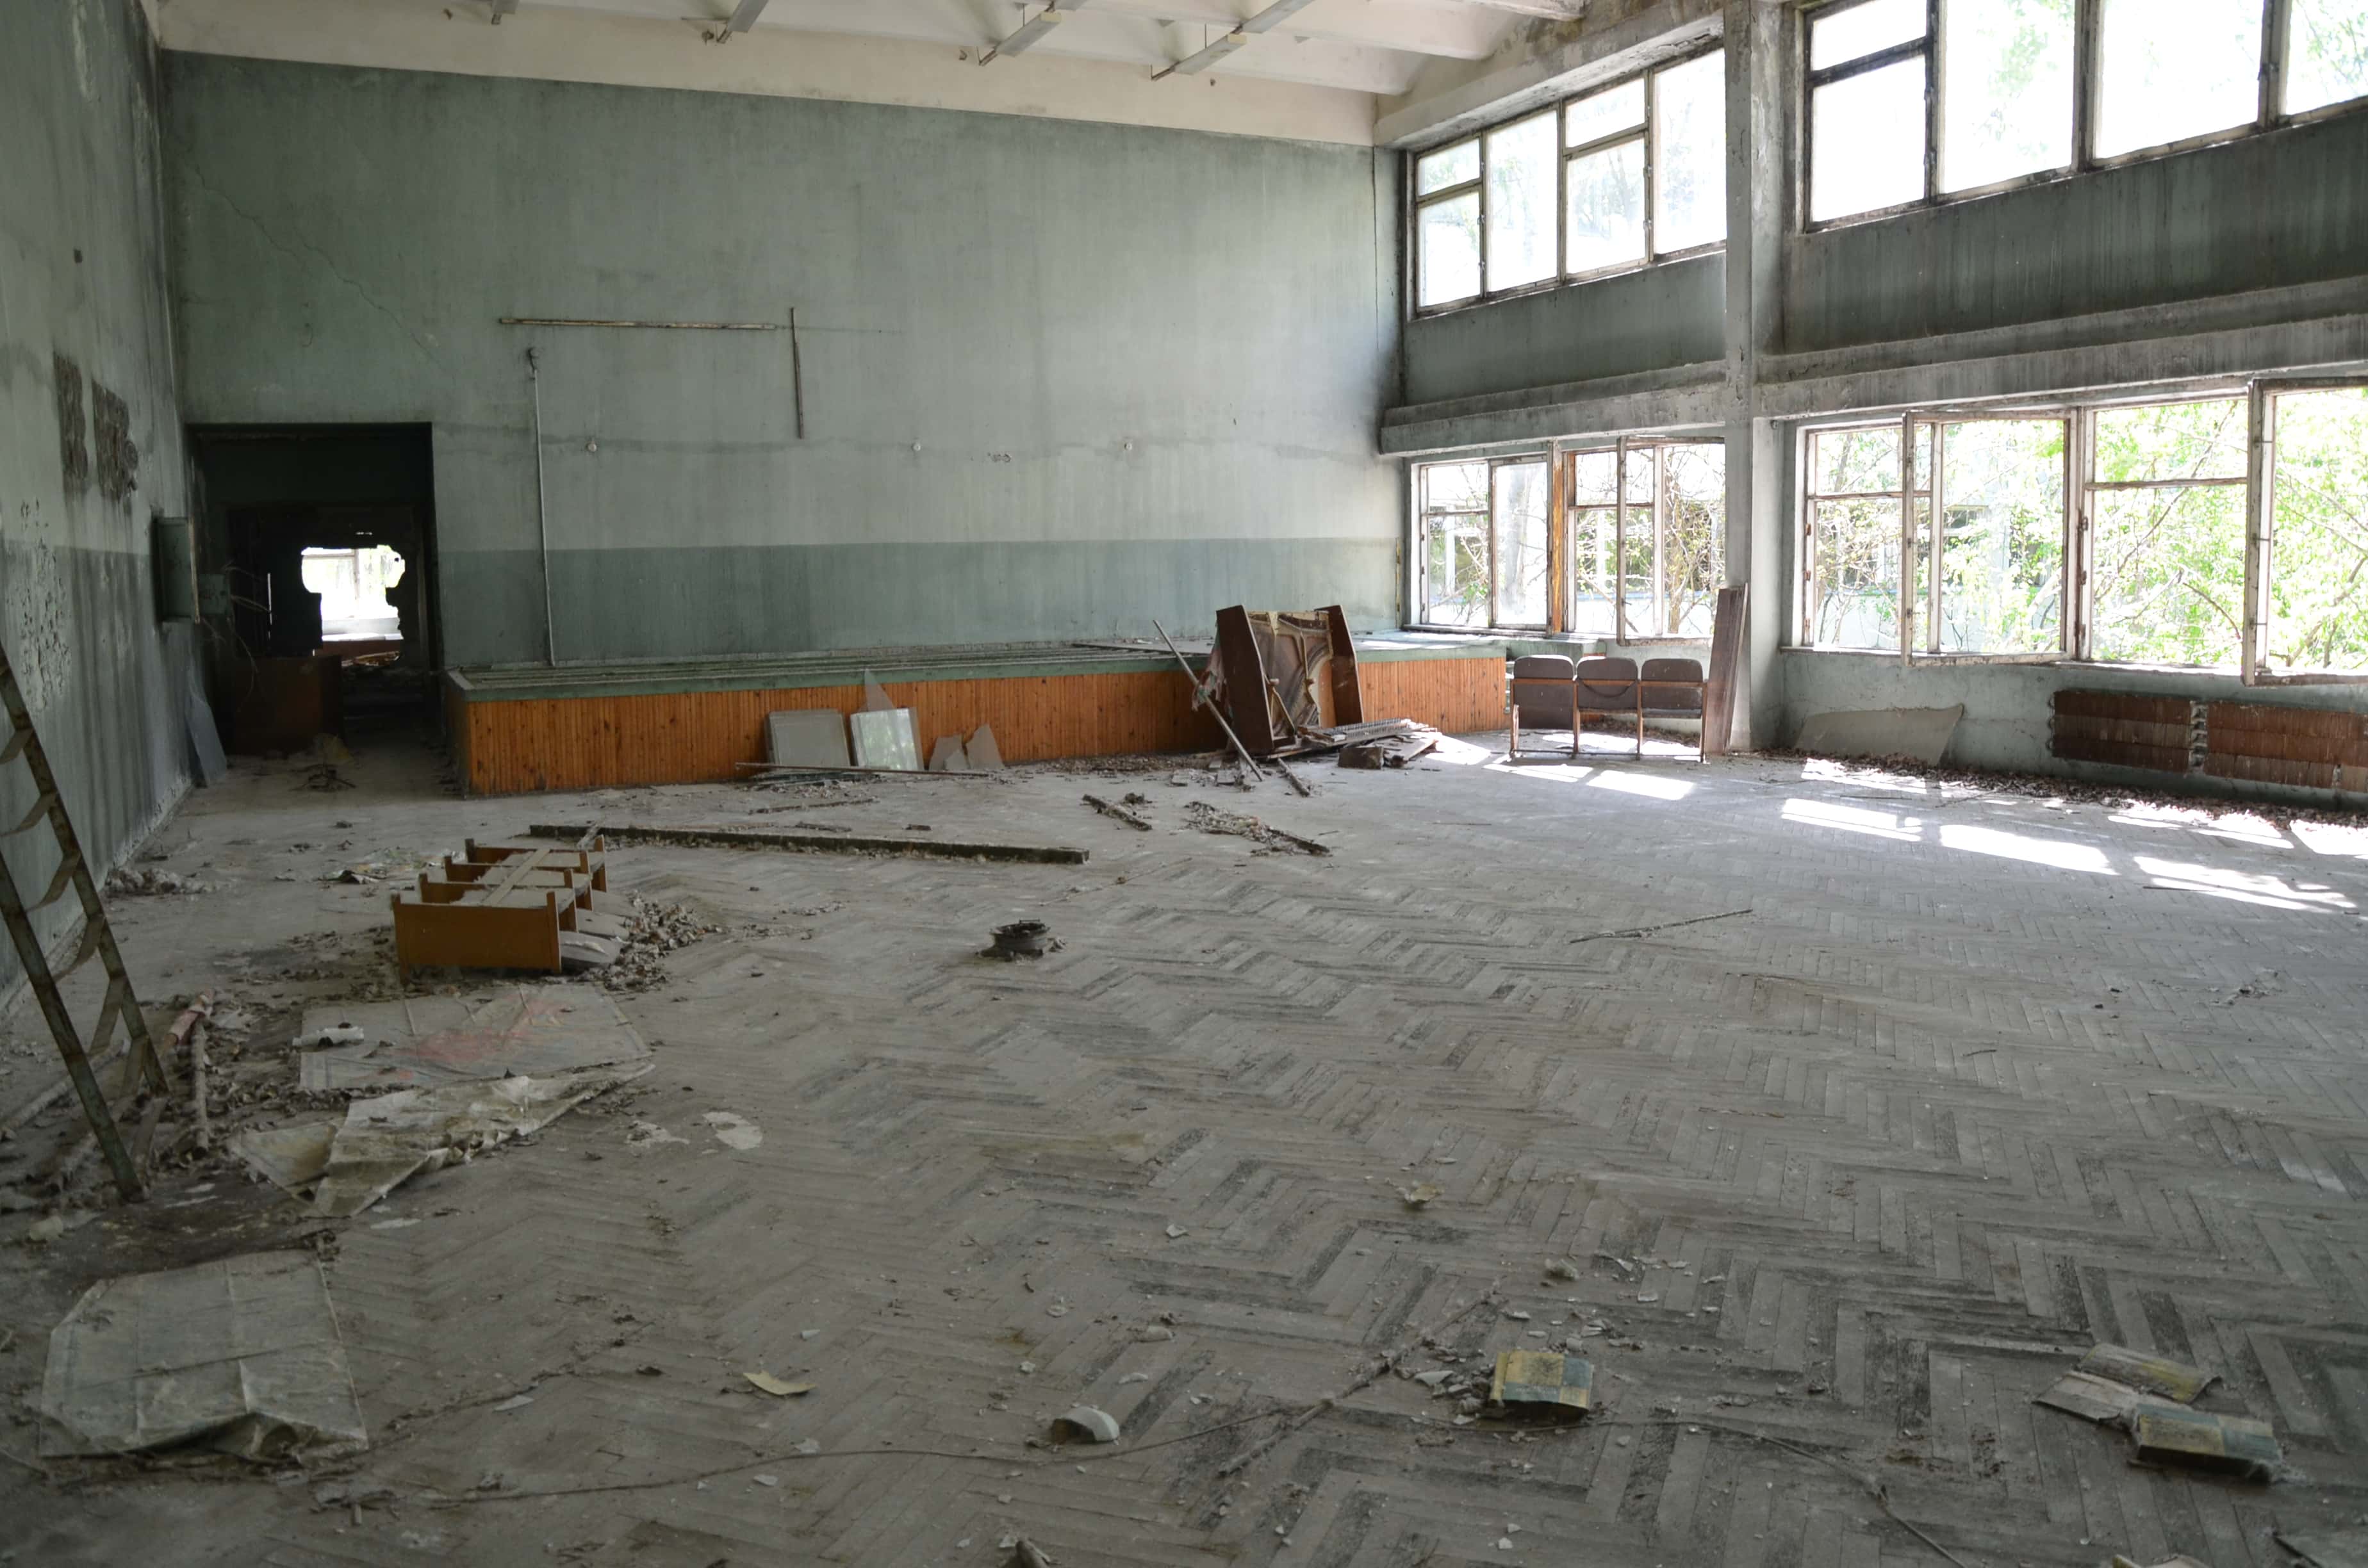 Performance hall at Middle School #5 in Pripyat, Chernobyl Exclusion Zone, Ukraine